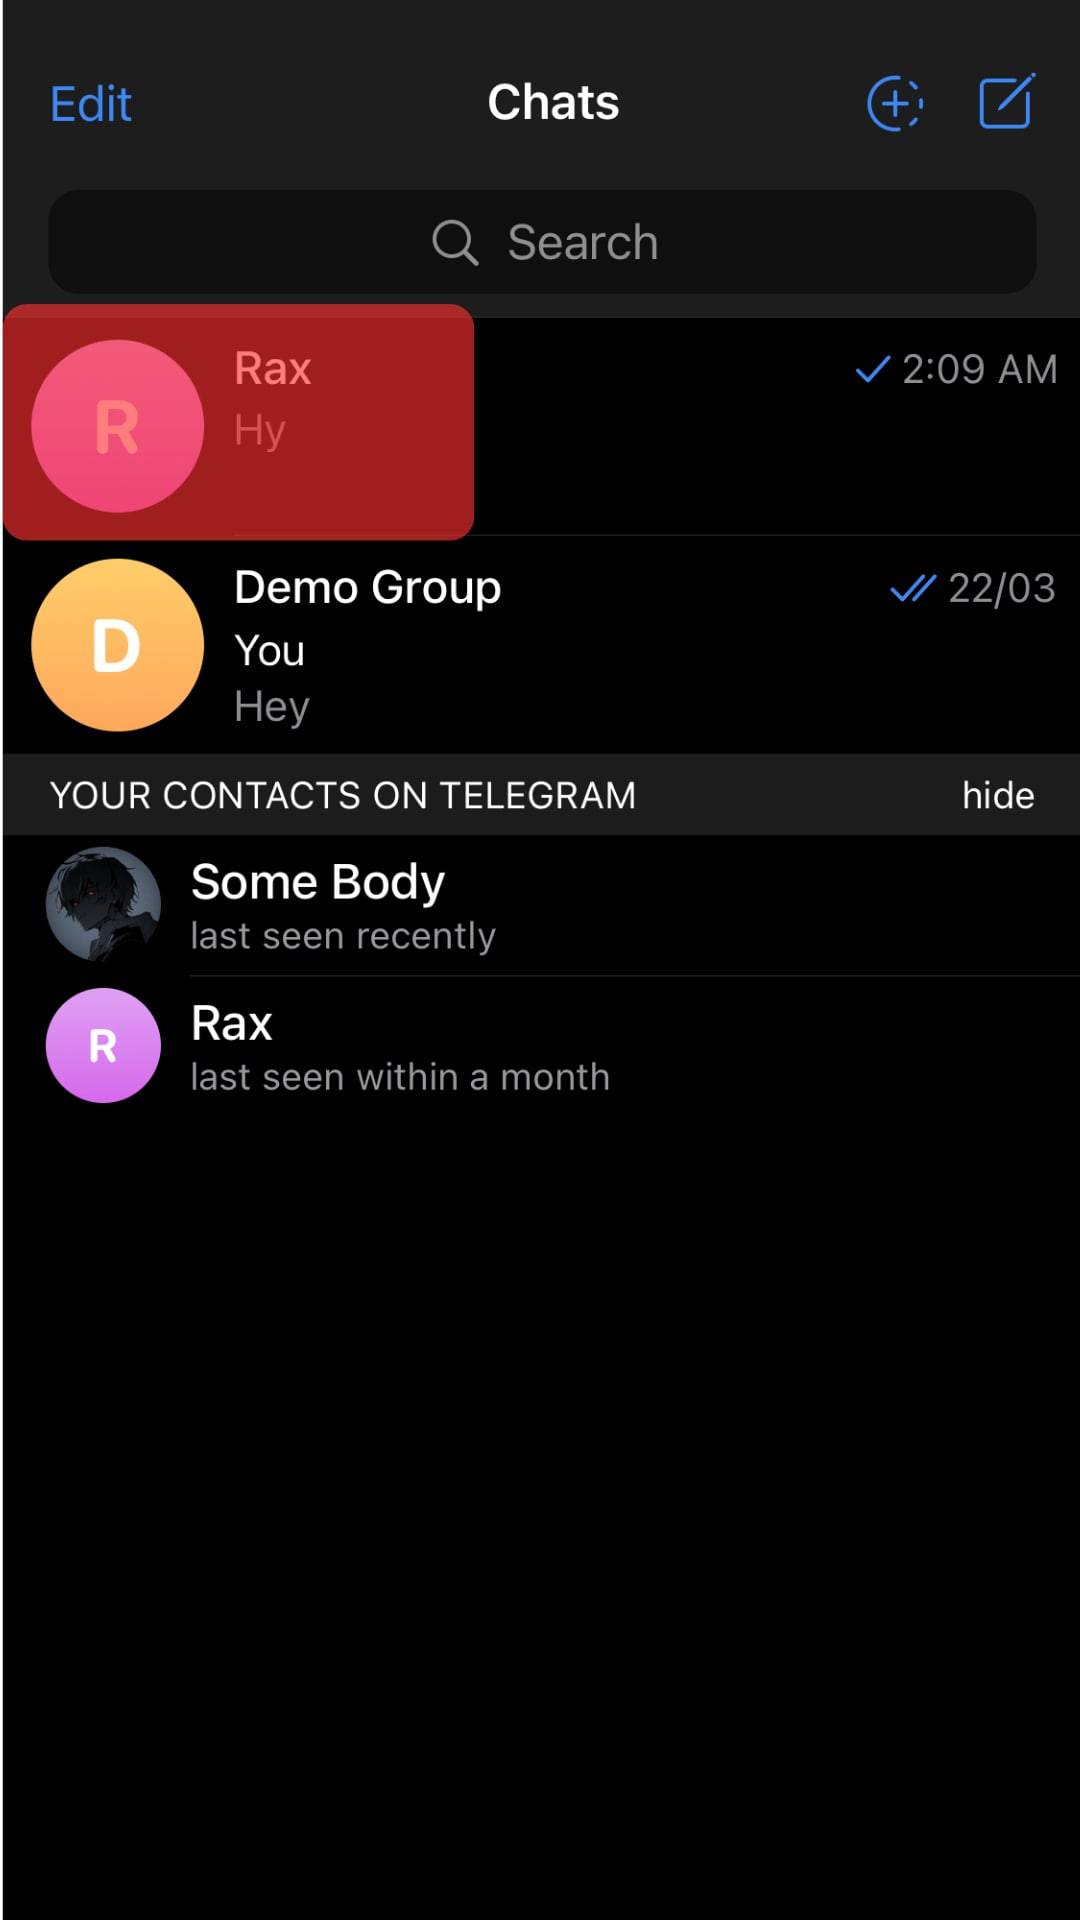 Head To The Specific Contact On Telegram